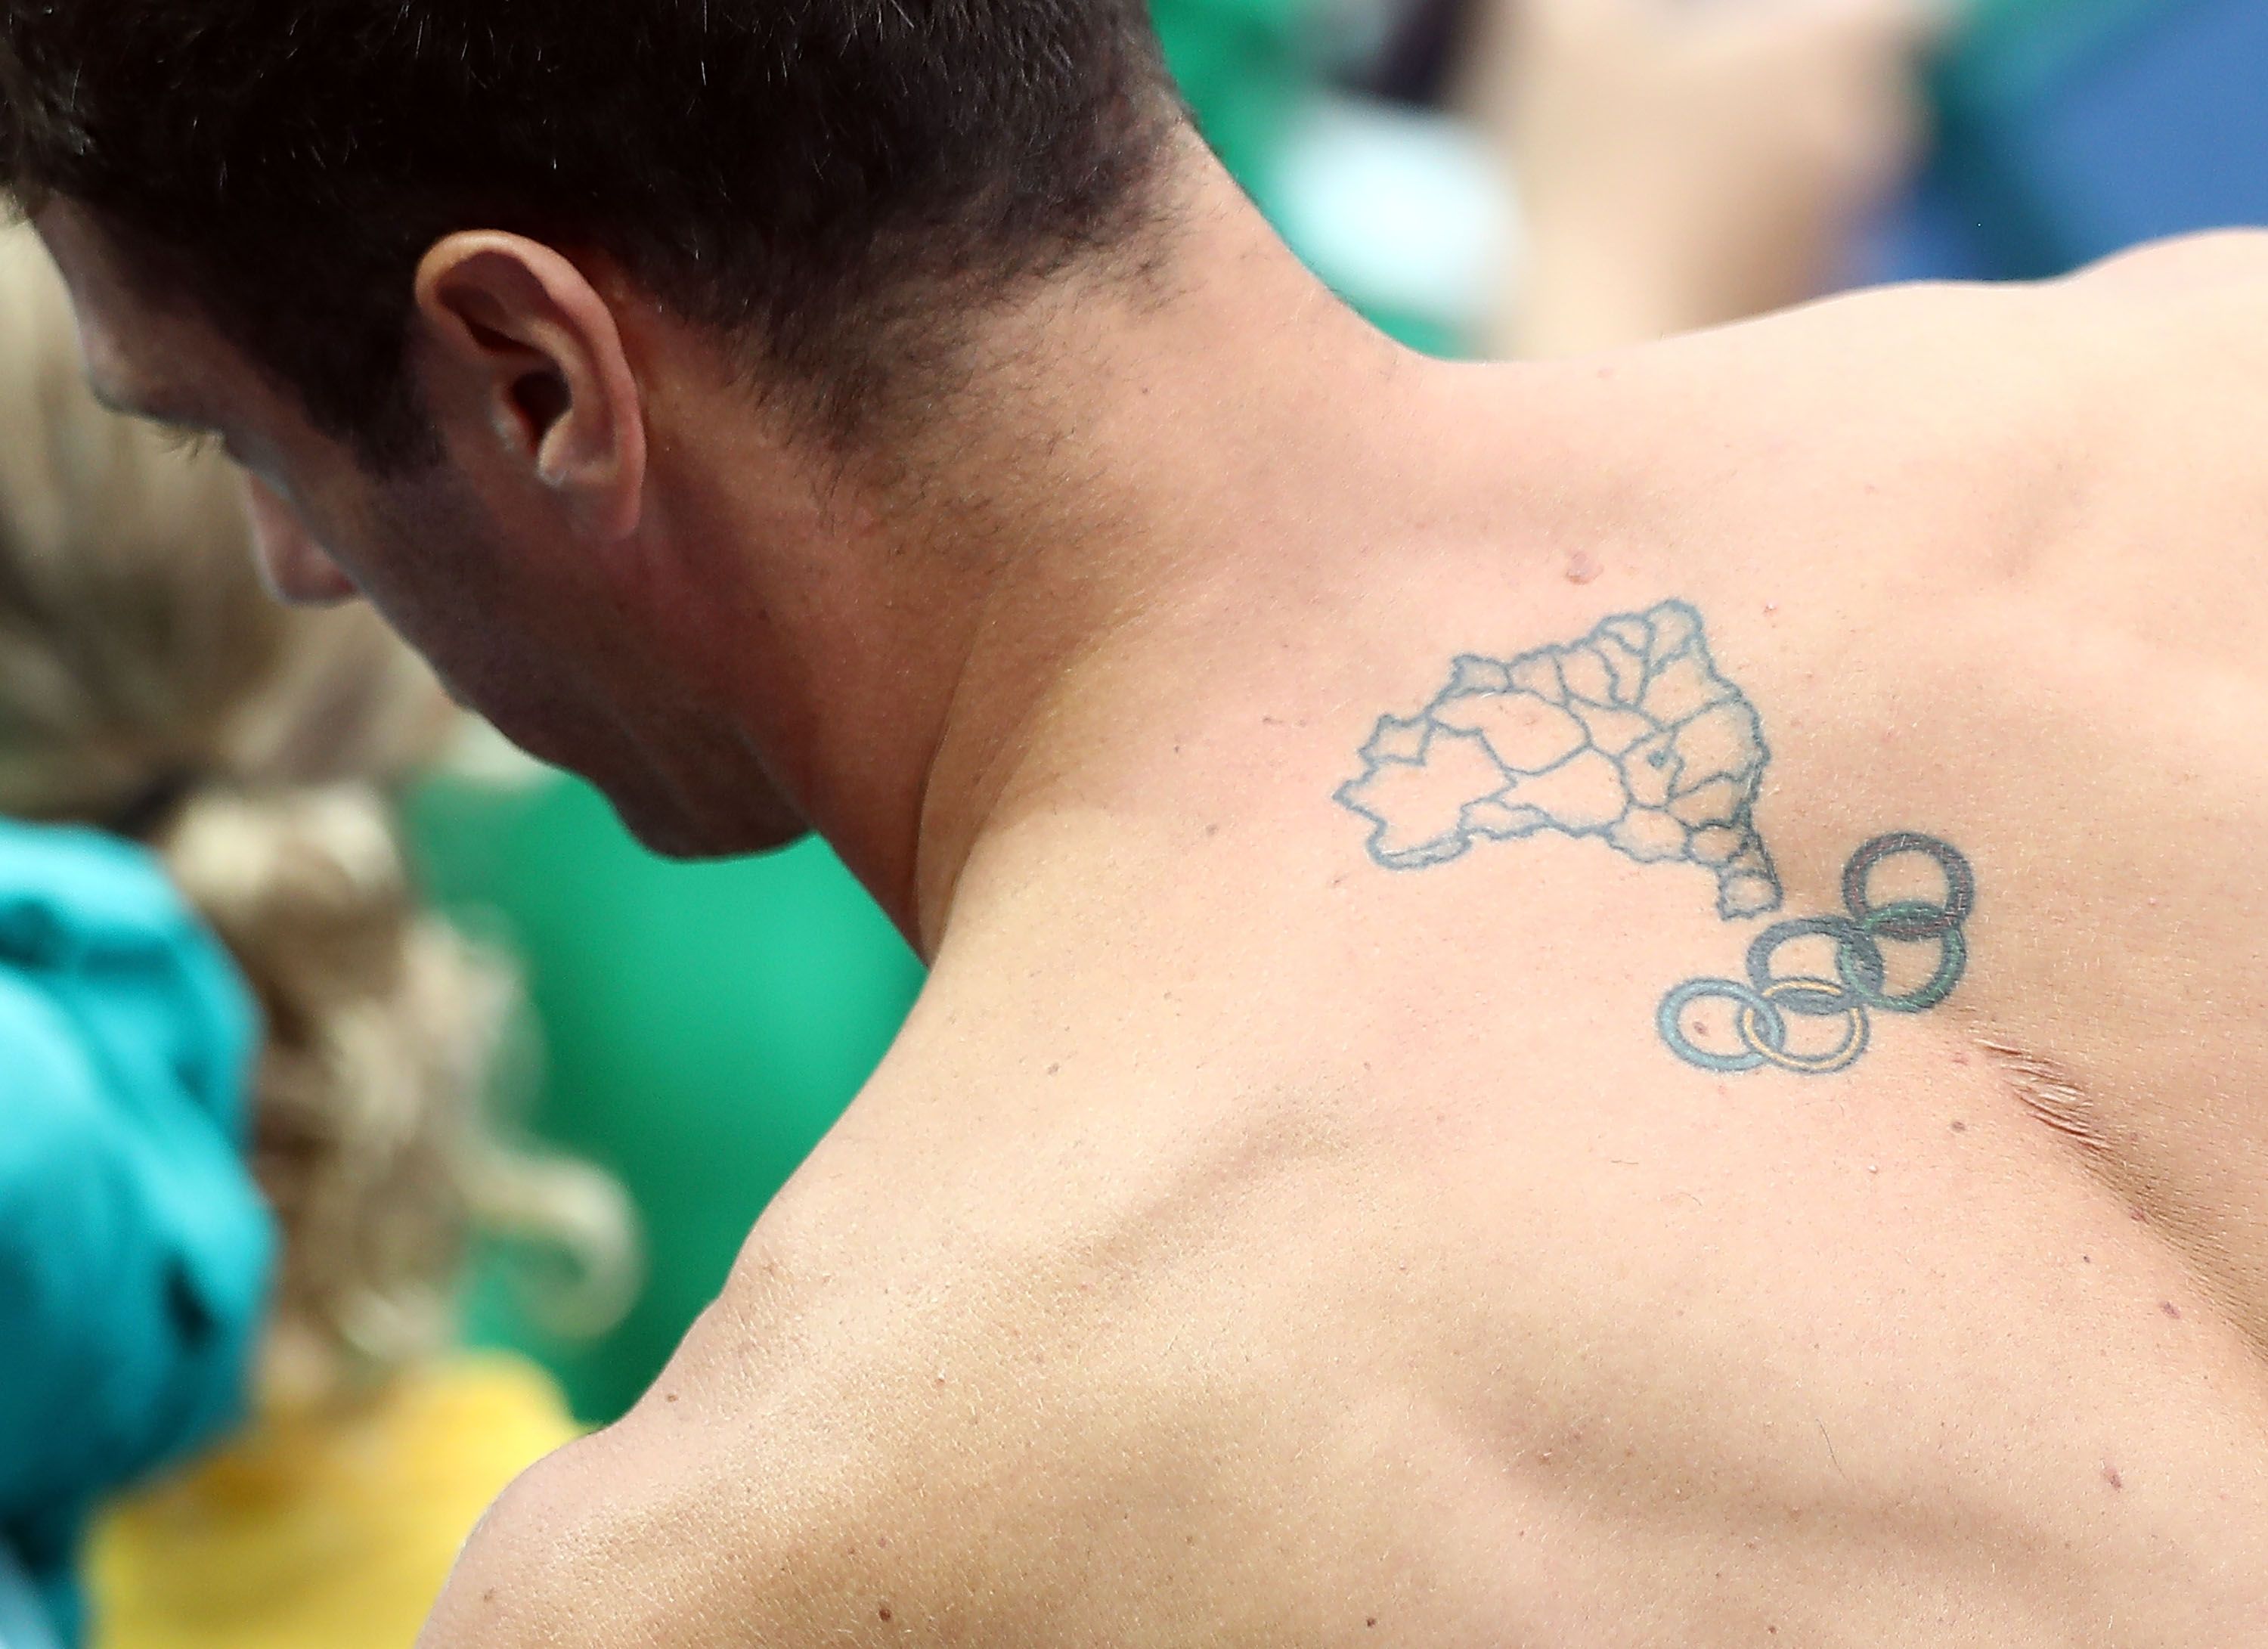 25 Athletes with Olympics Tattoos - Olympic Rings Tattoo